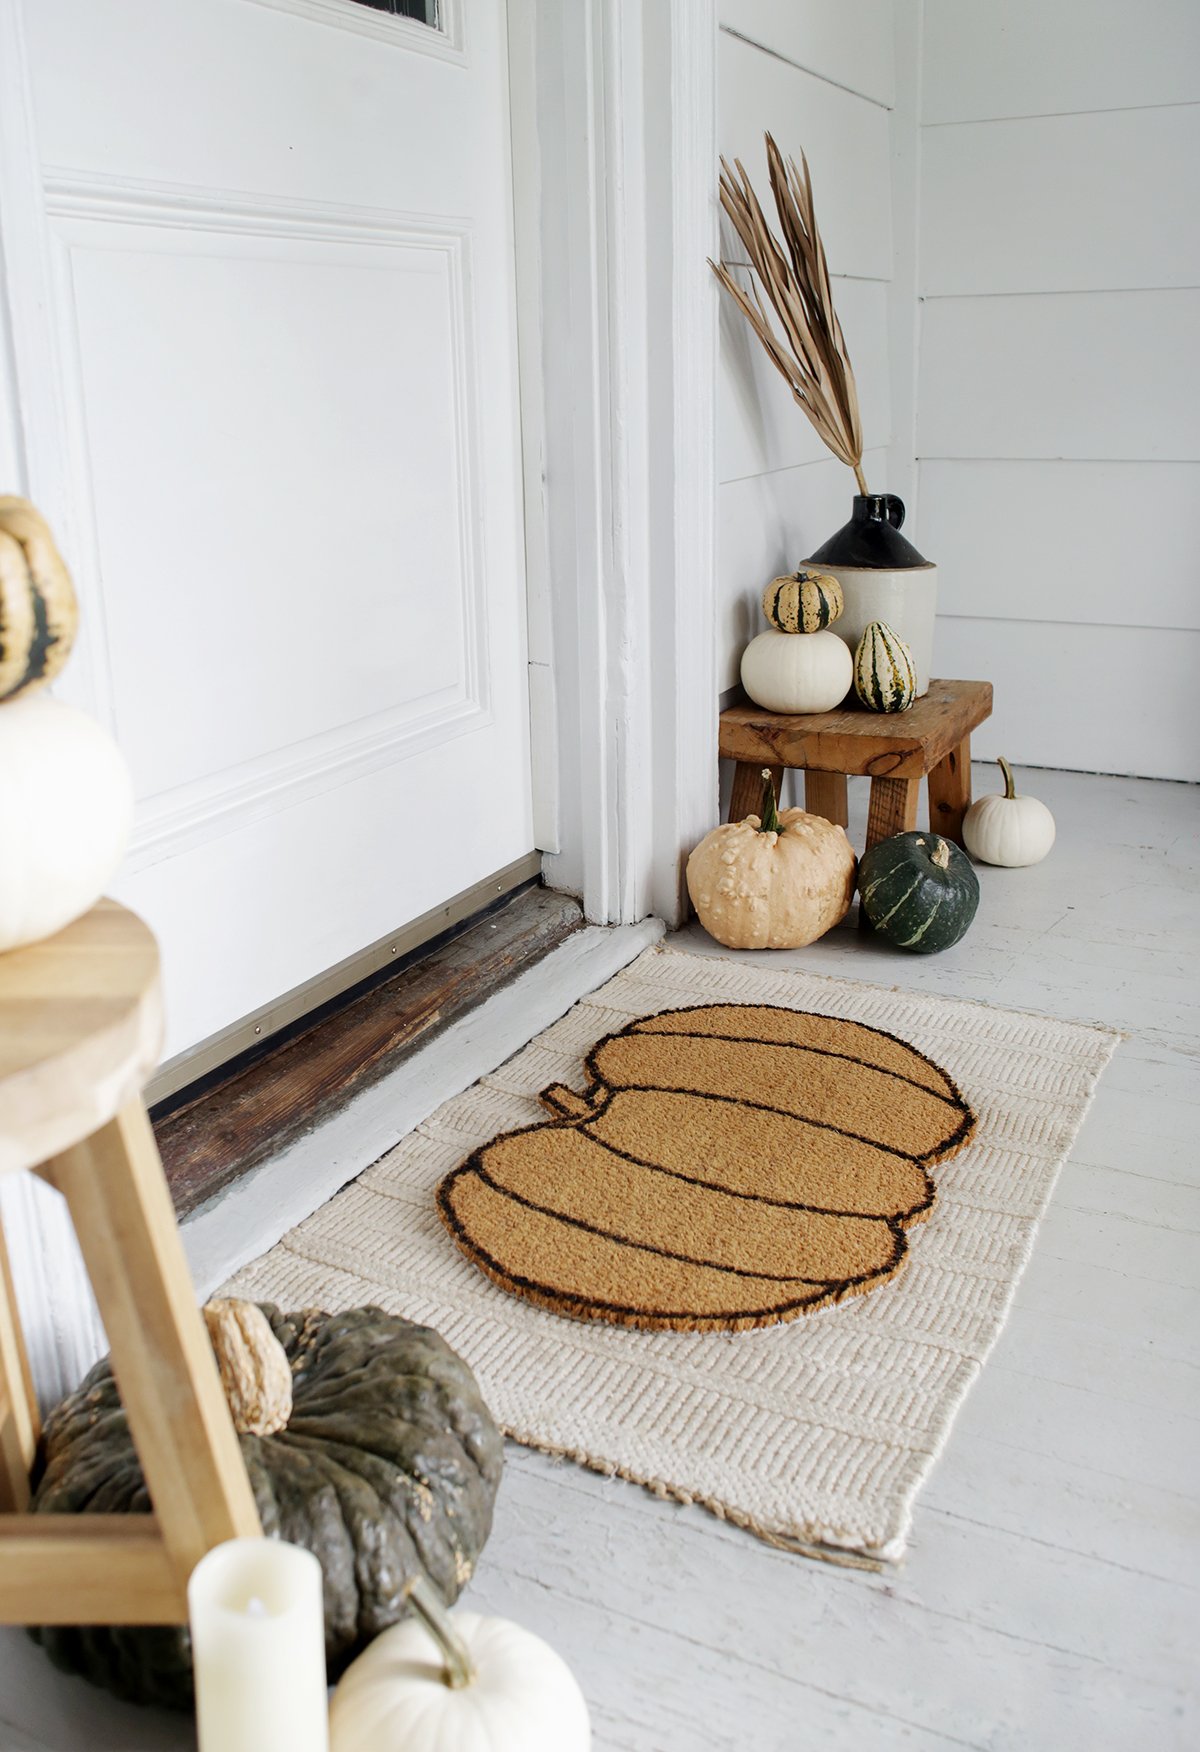 Top 5 Doormat Ideas at Home 🚲 Awesome Doormat Making ☔ 5